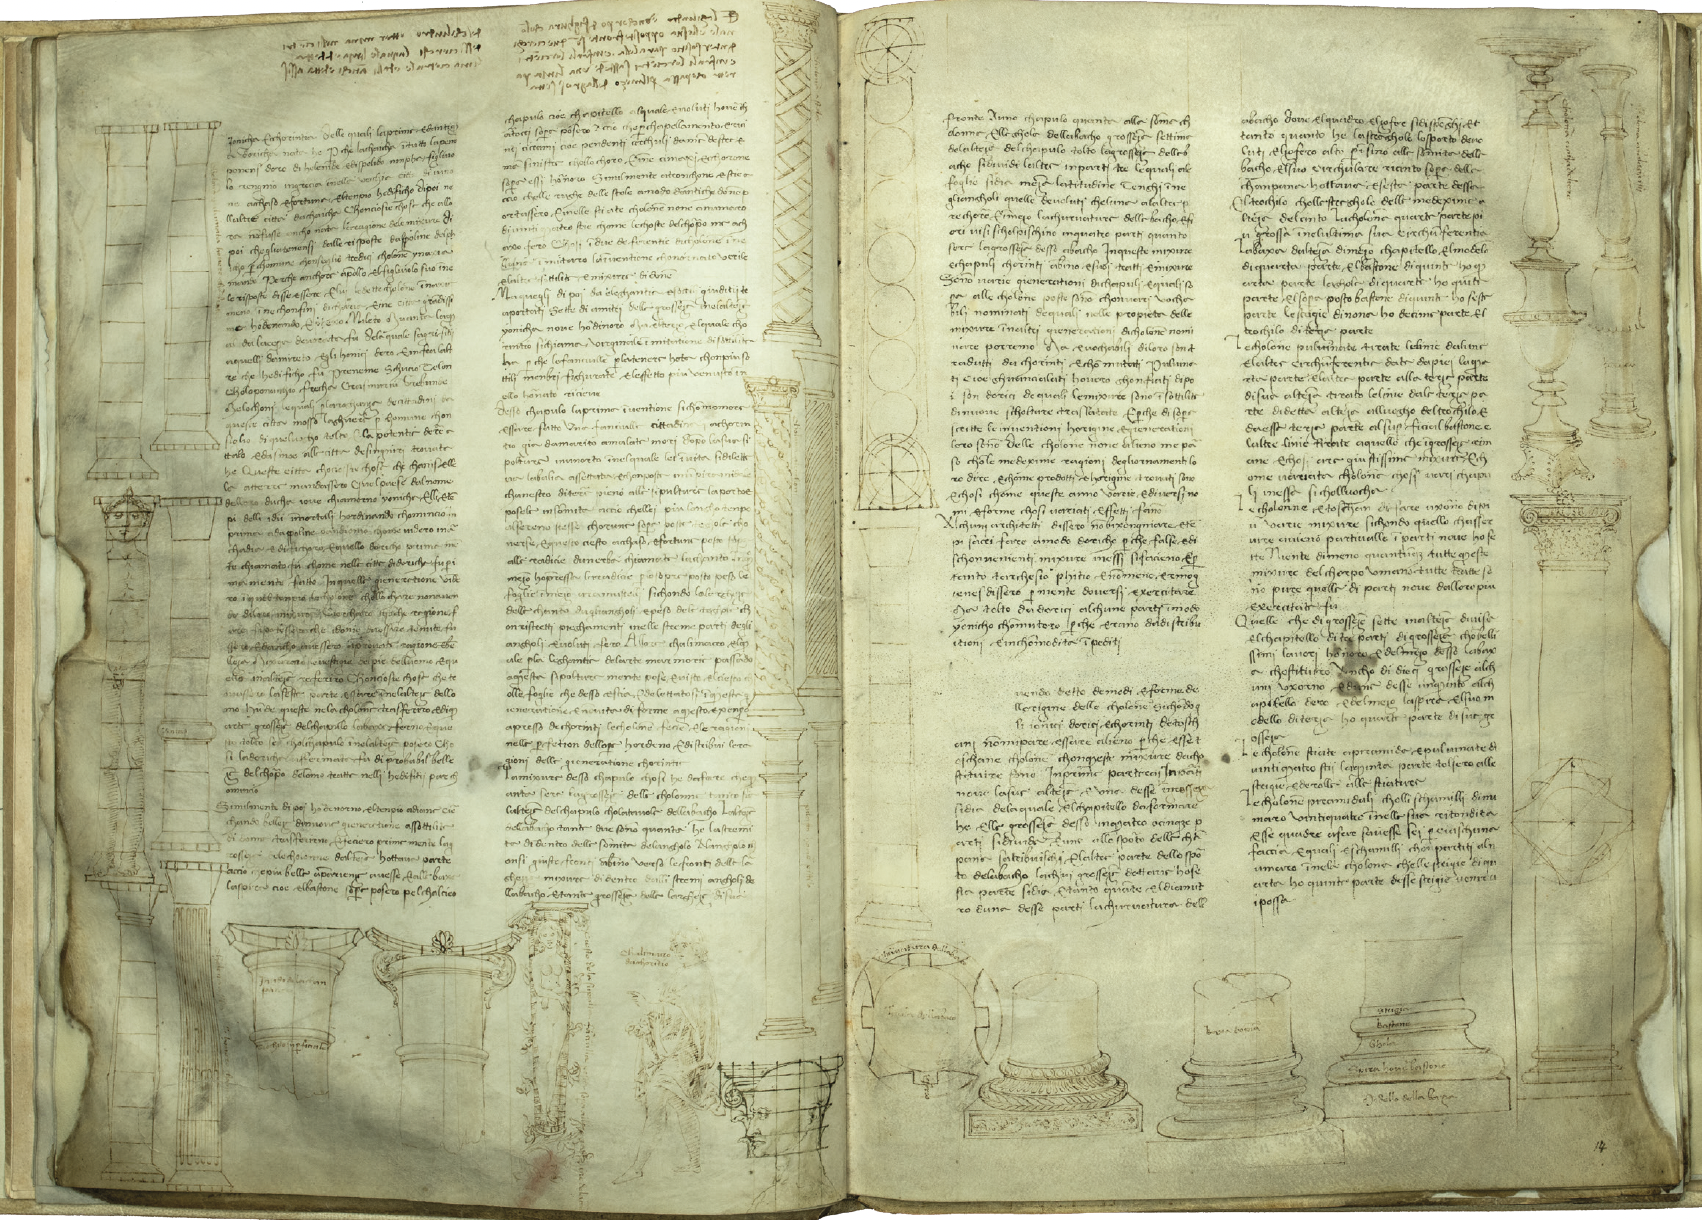 image of an ancient book